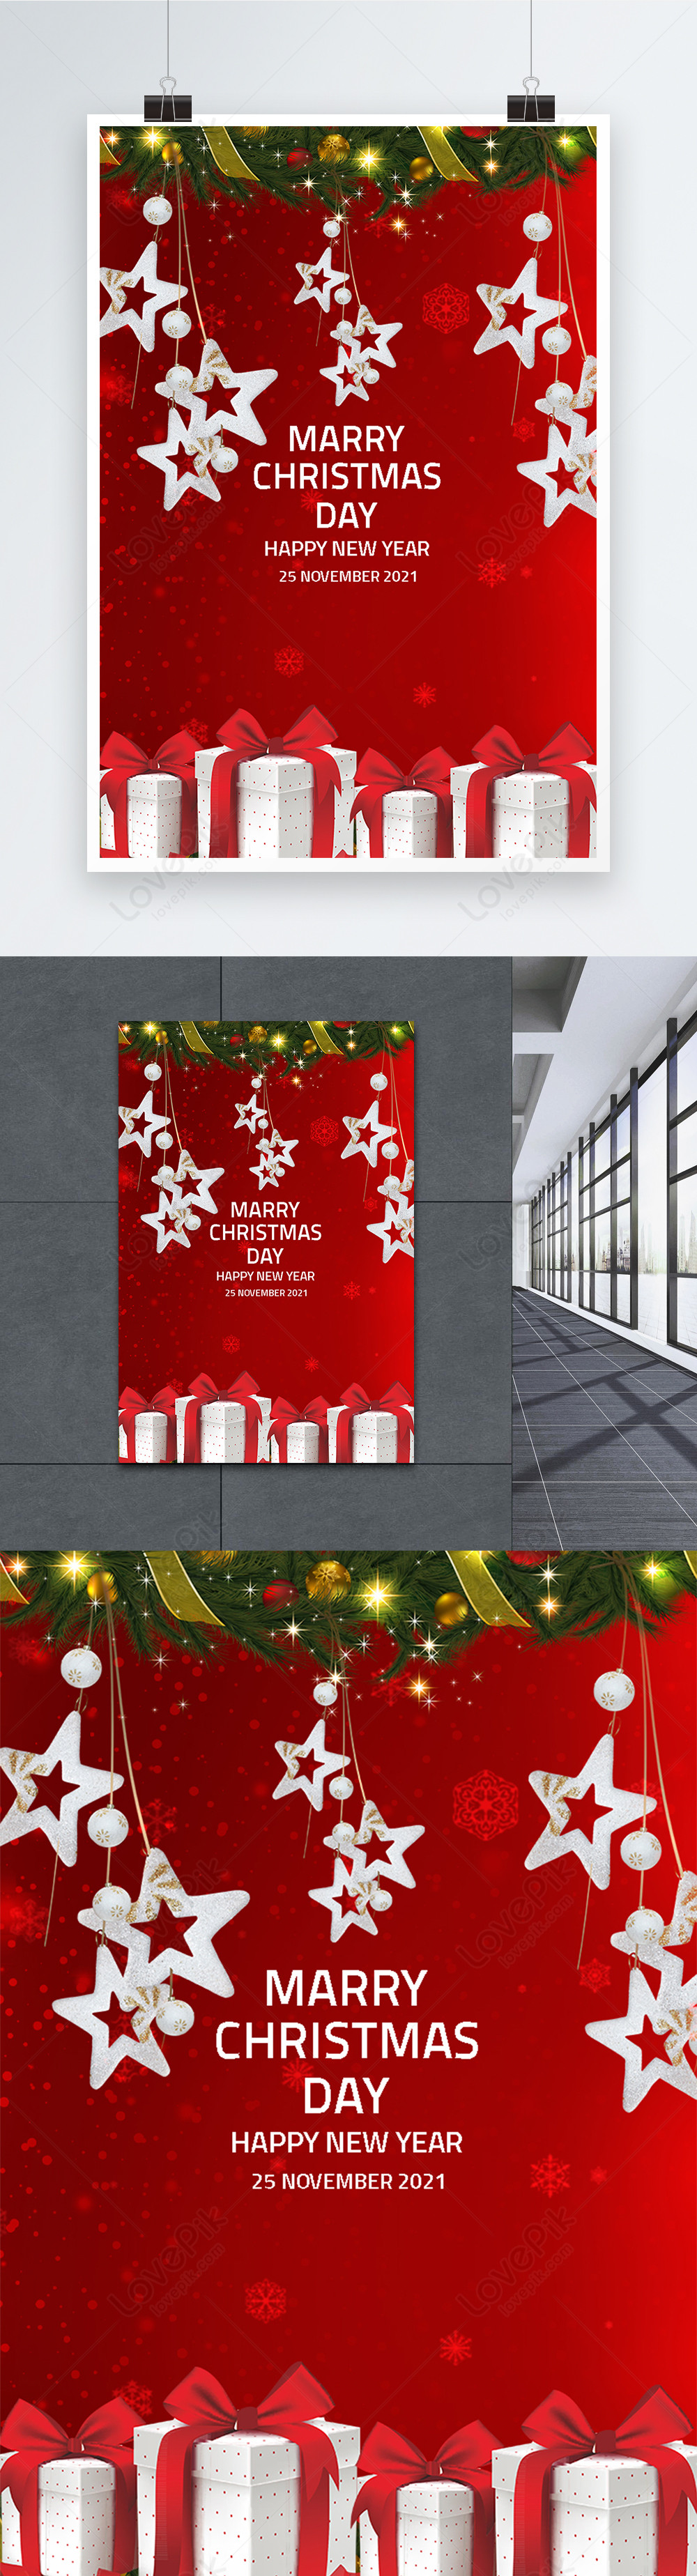 christmas-poster-template-image-picture-free-download-450110207-lovepik